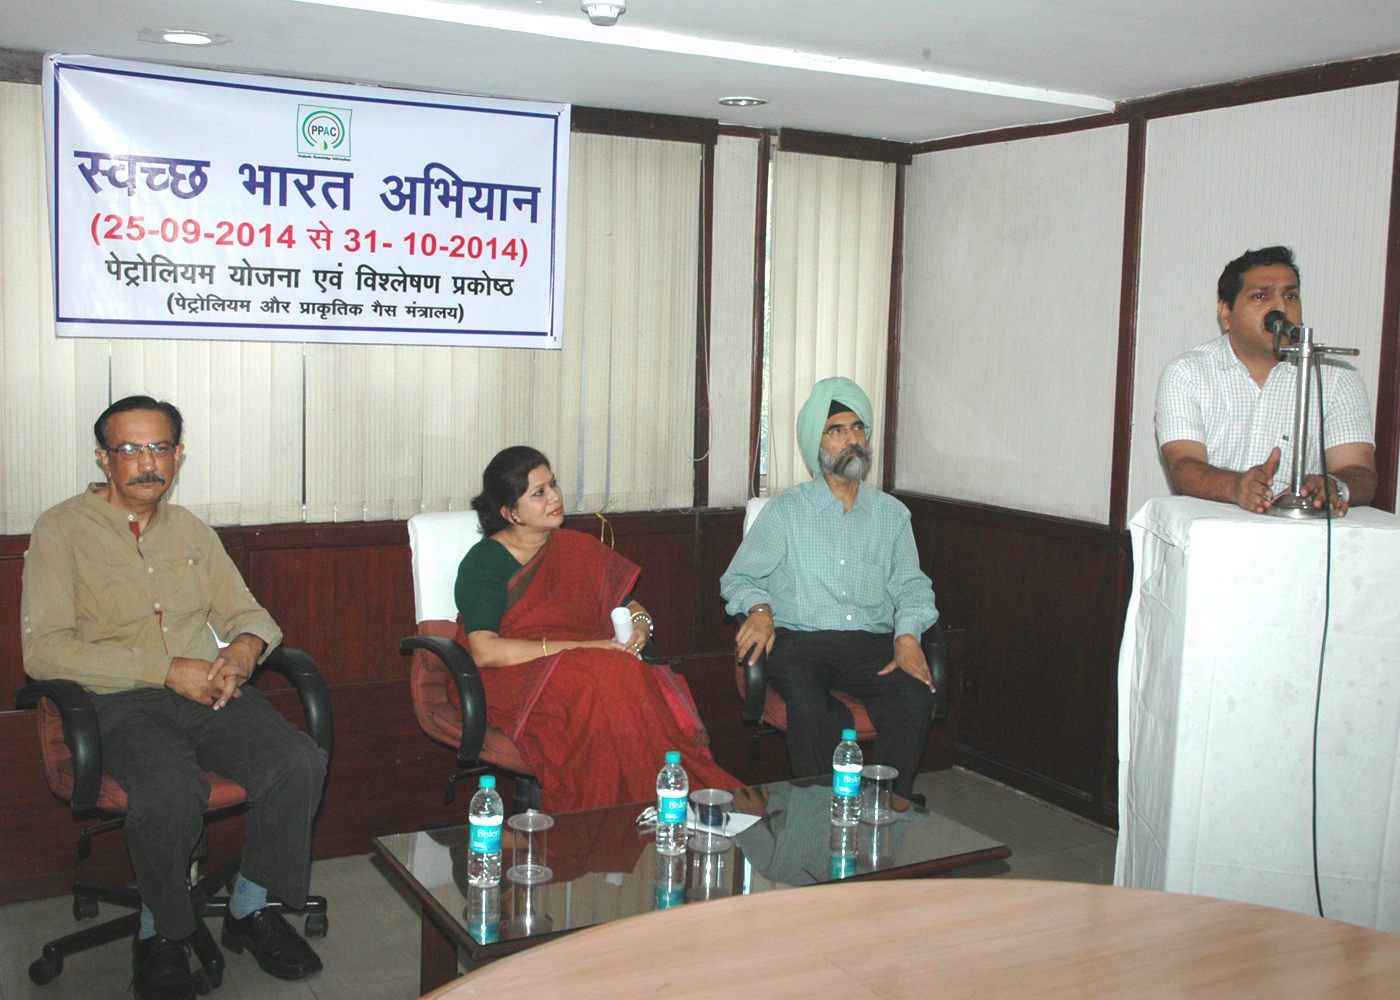 Officers Speaking on the occasion of Swachh Bharat Abhiyaan